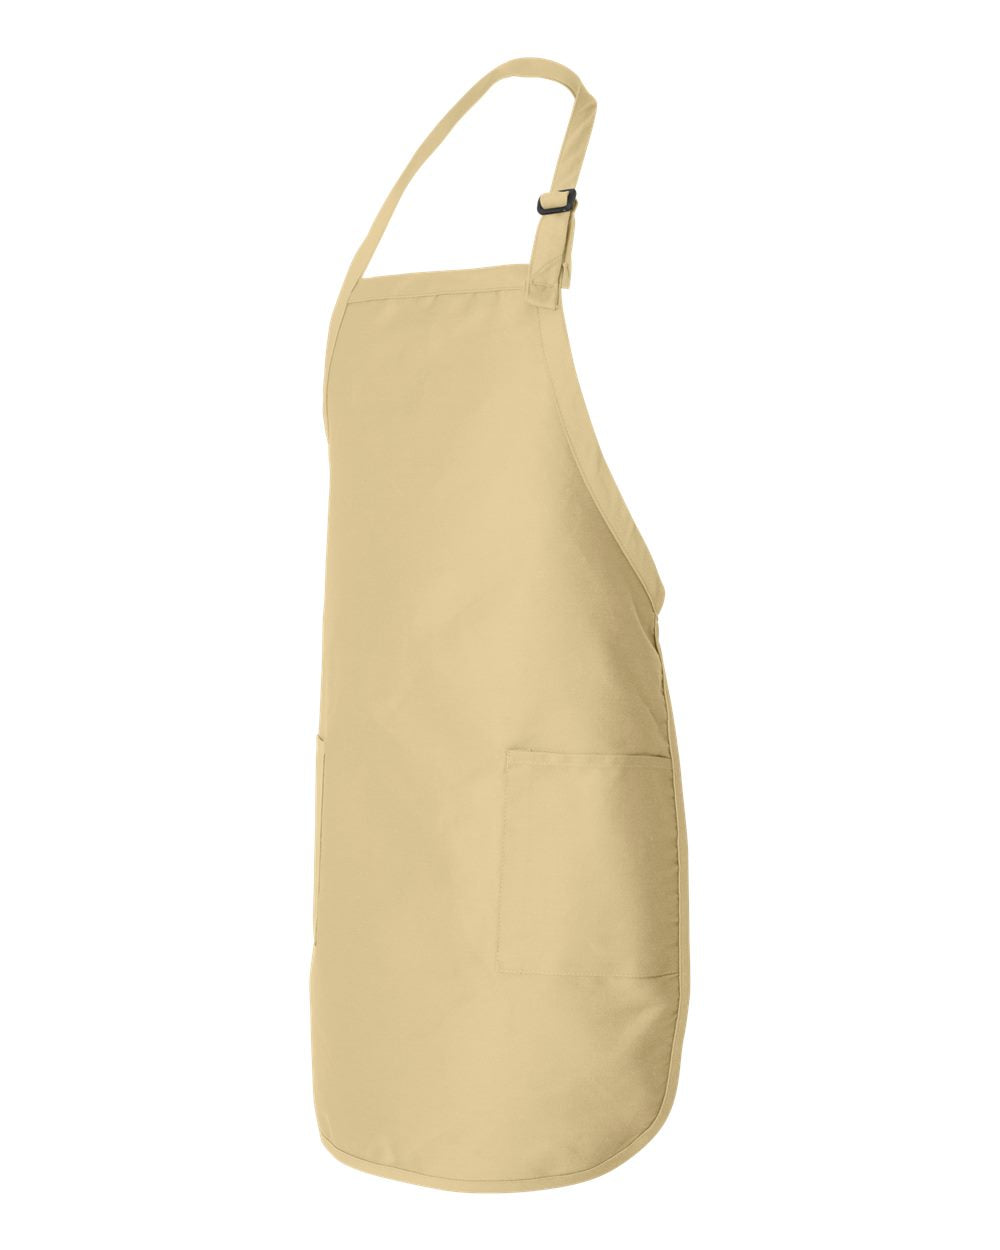 Full Length Apron with Adjustable Neck Strap/Pockets- Design your own